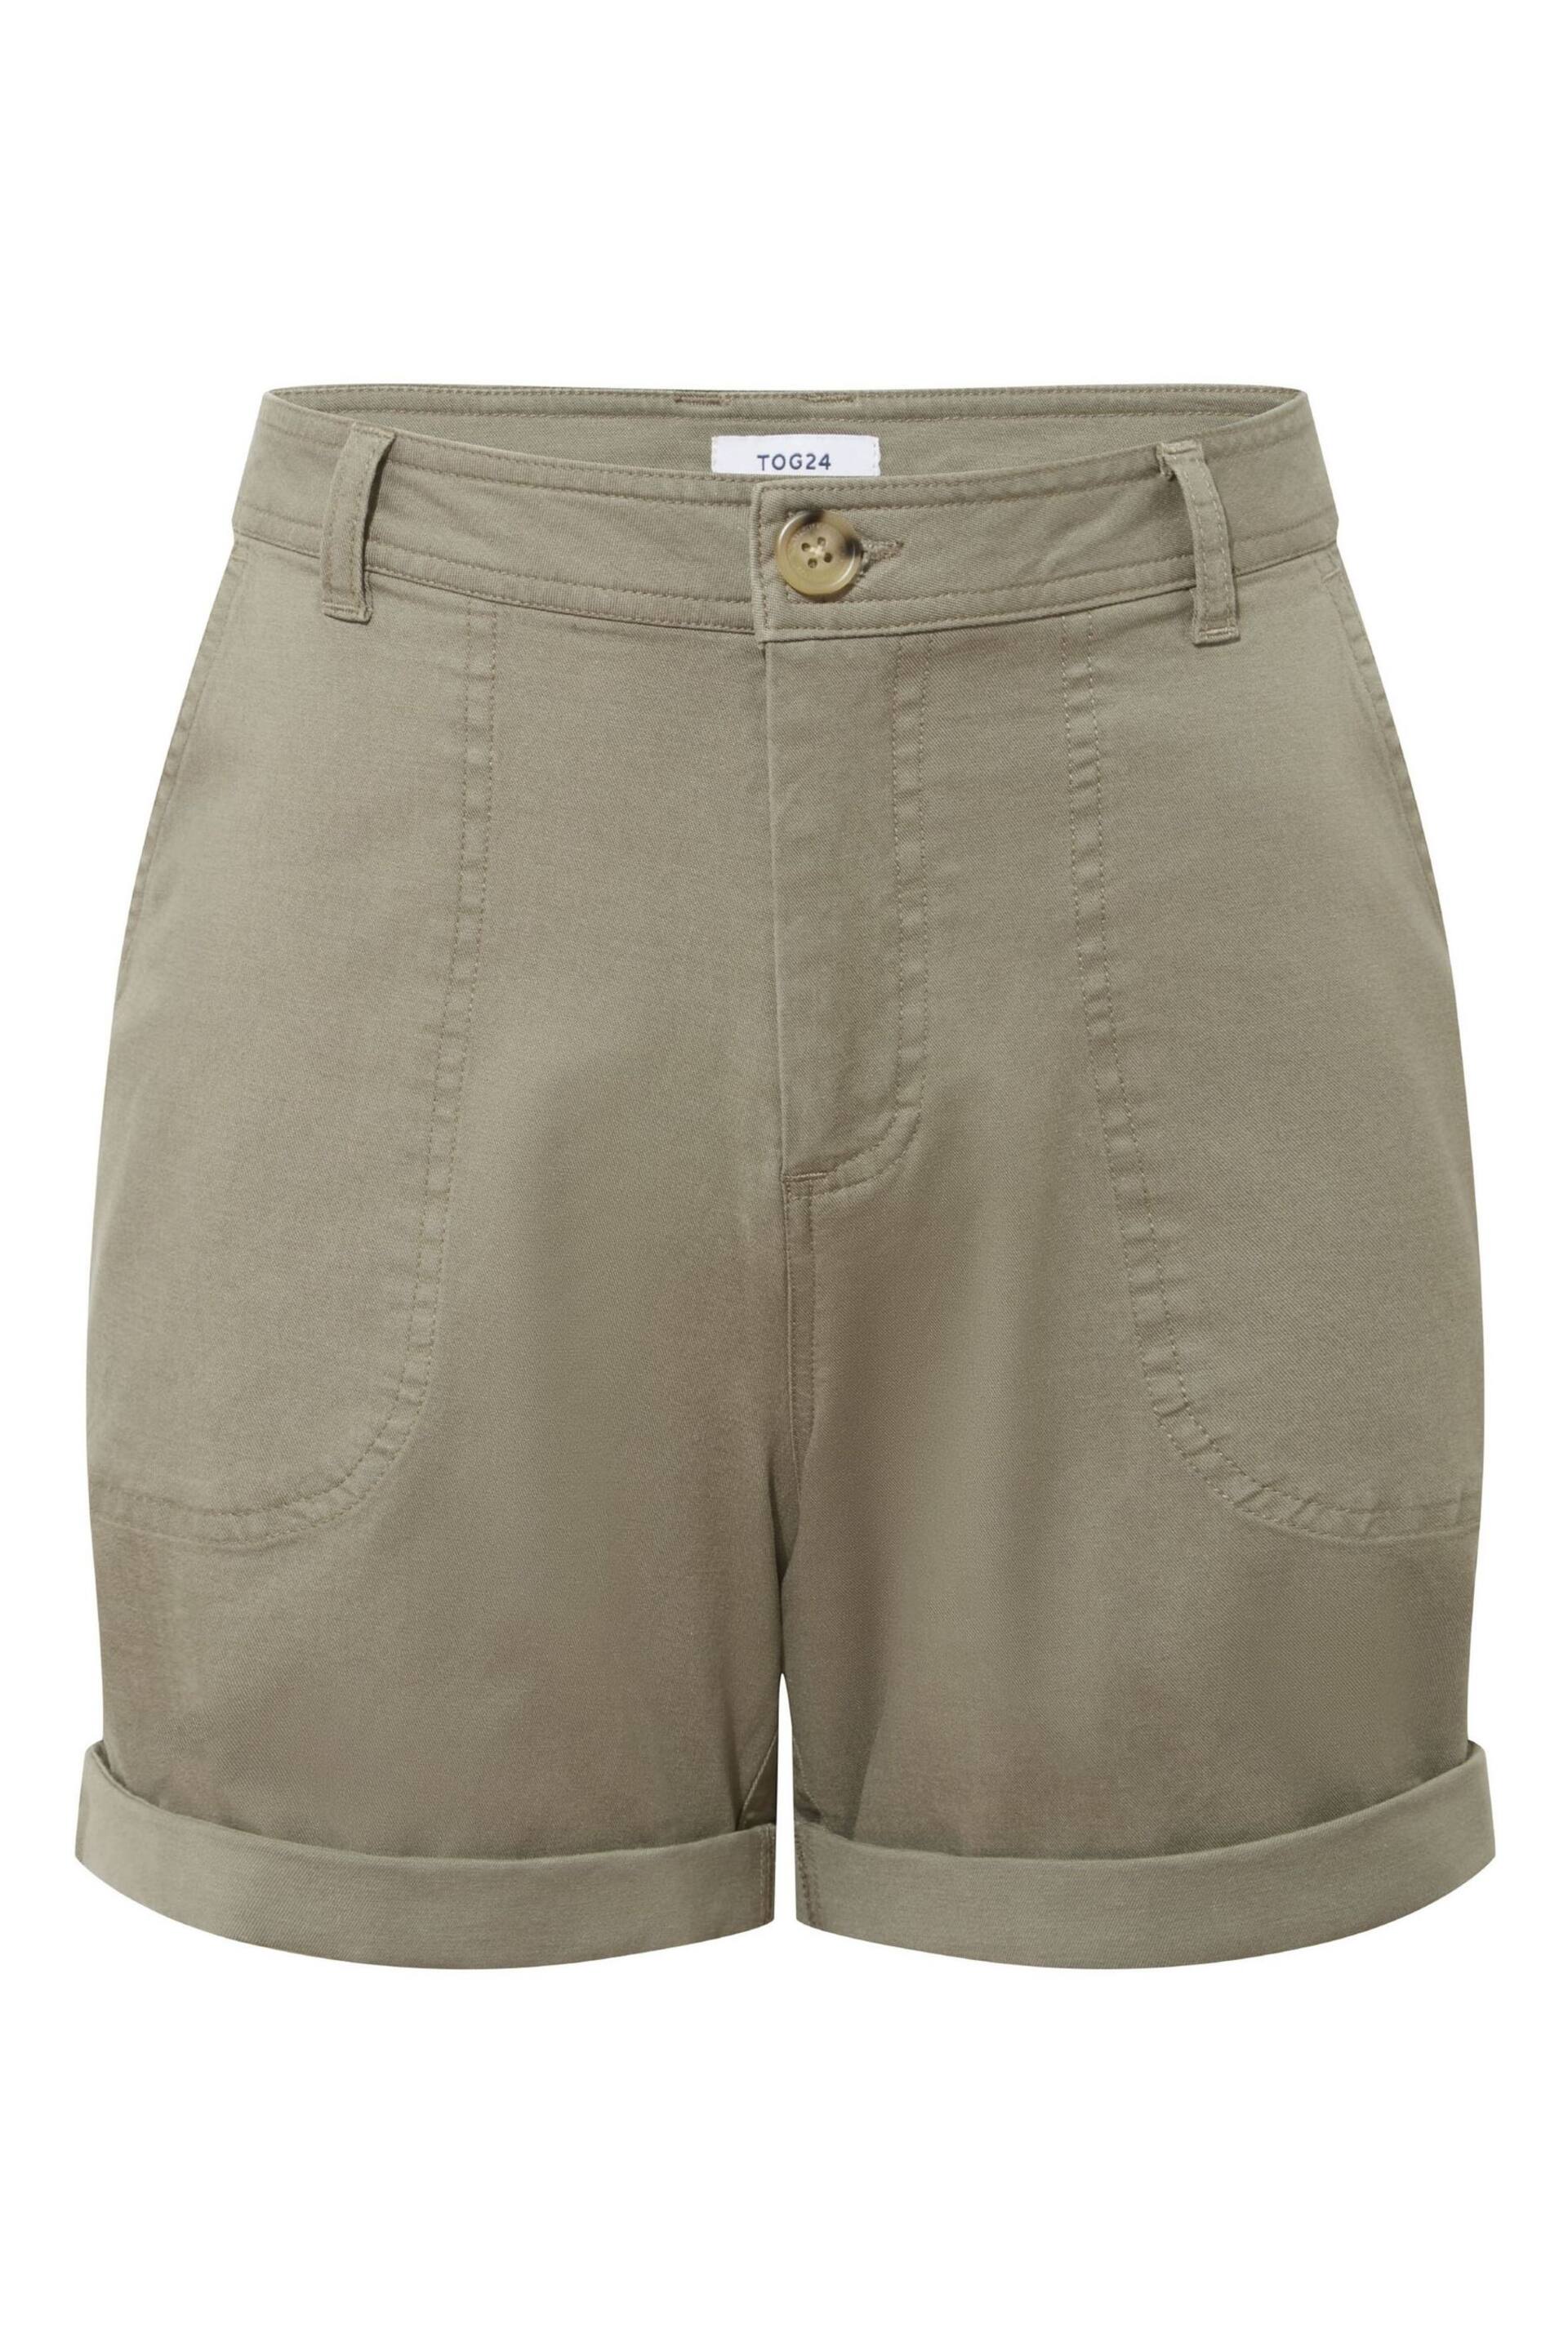 Tog 24 Green Canvey Shorts - Image 4 of 4